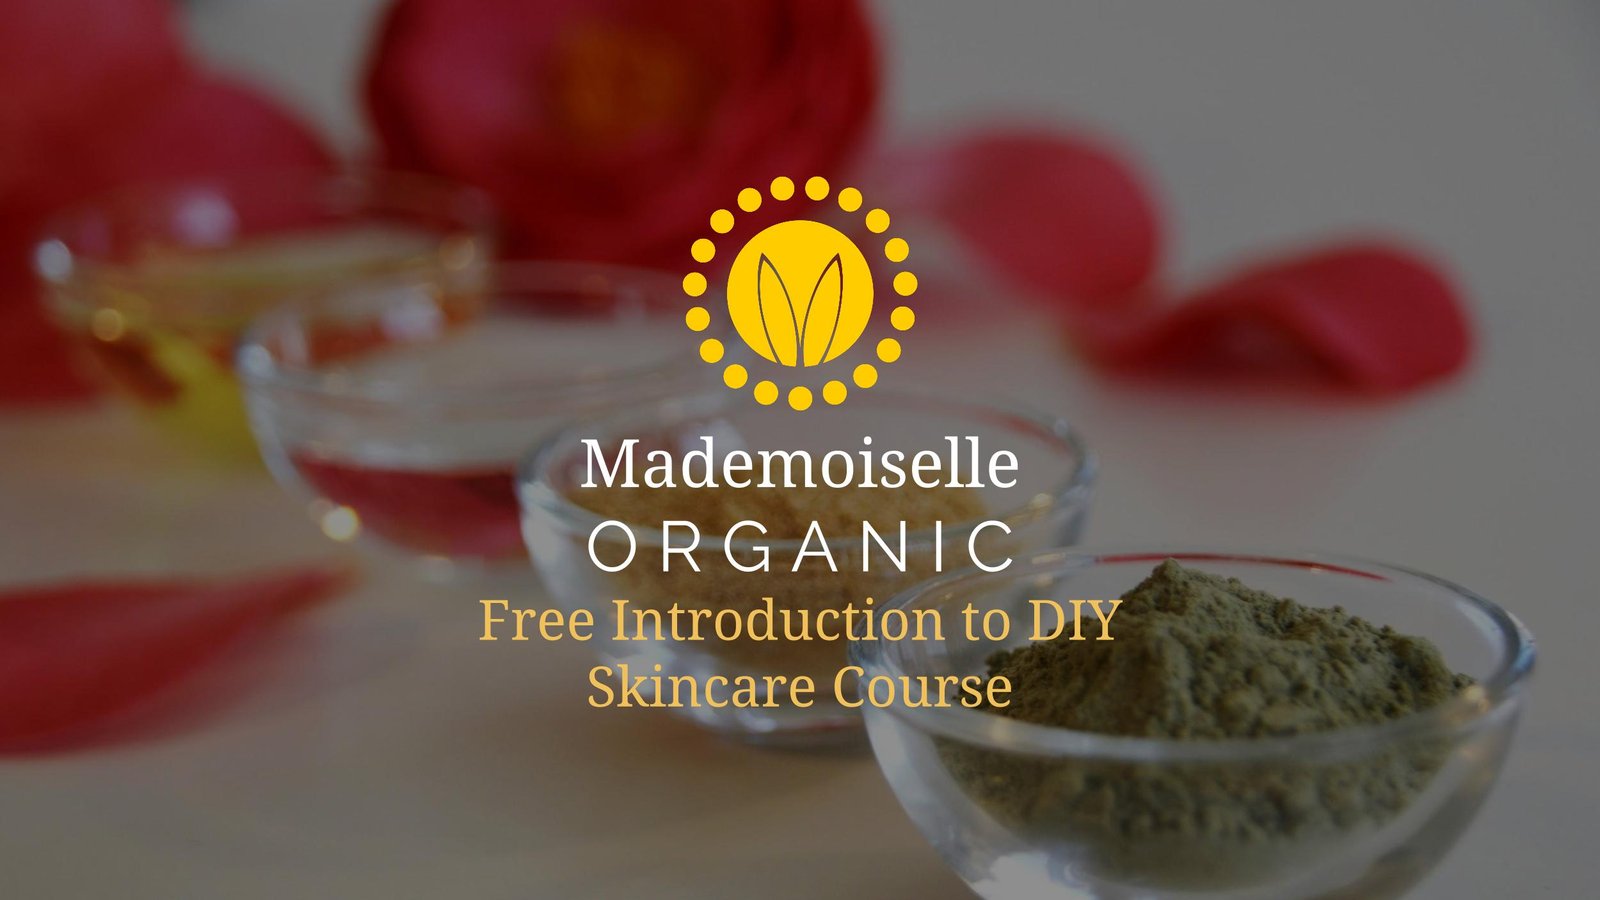 Free Introduction to DIY Skincare Course